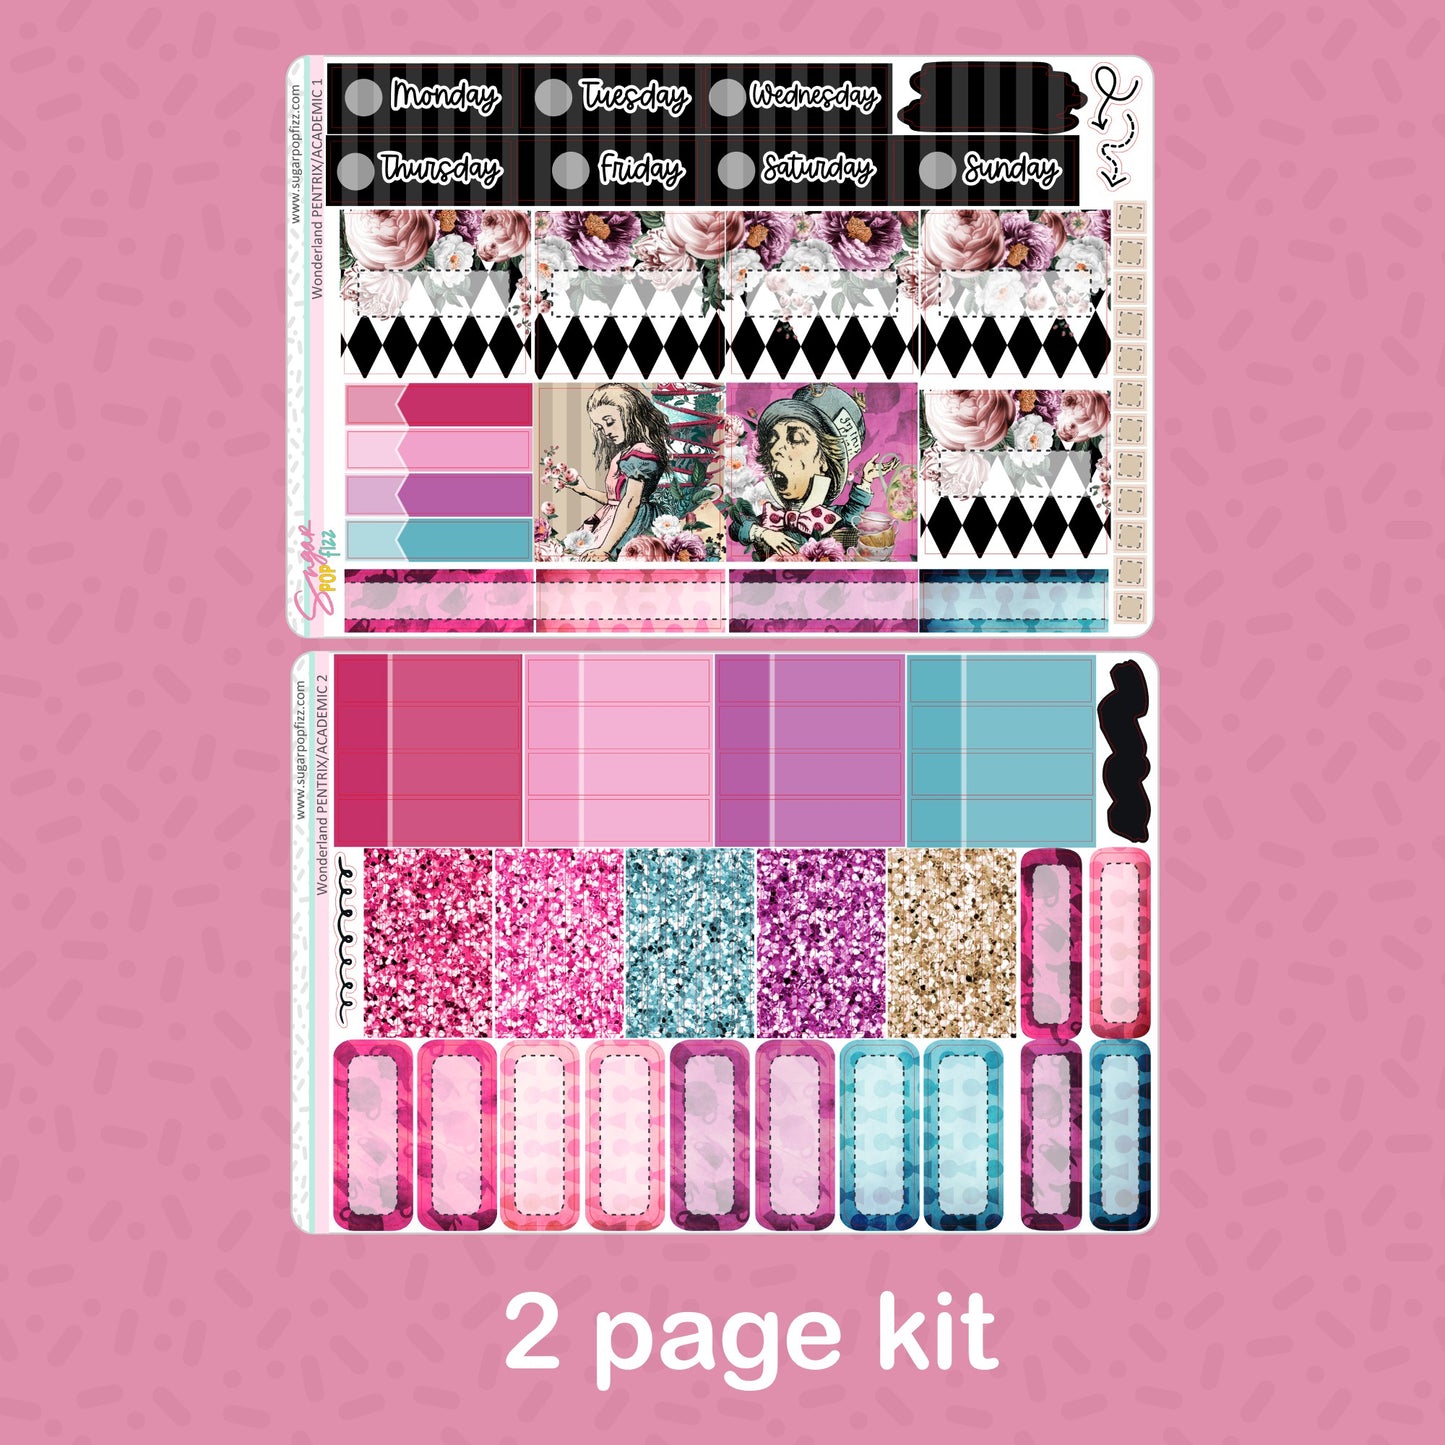 Wonderland Penny Pages Pentrix Weekly Kit